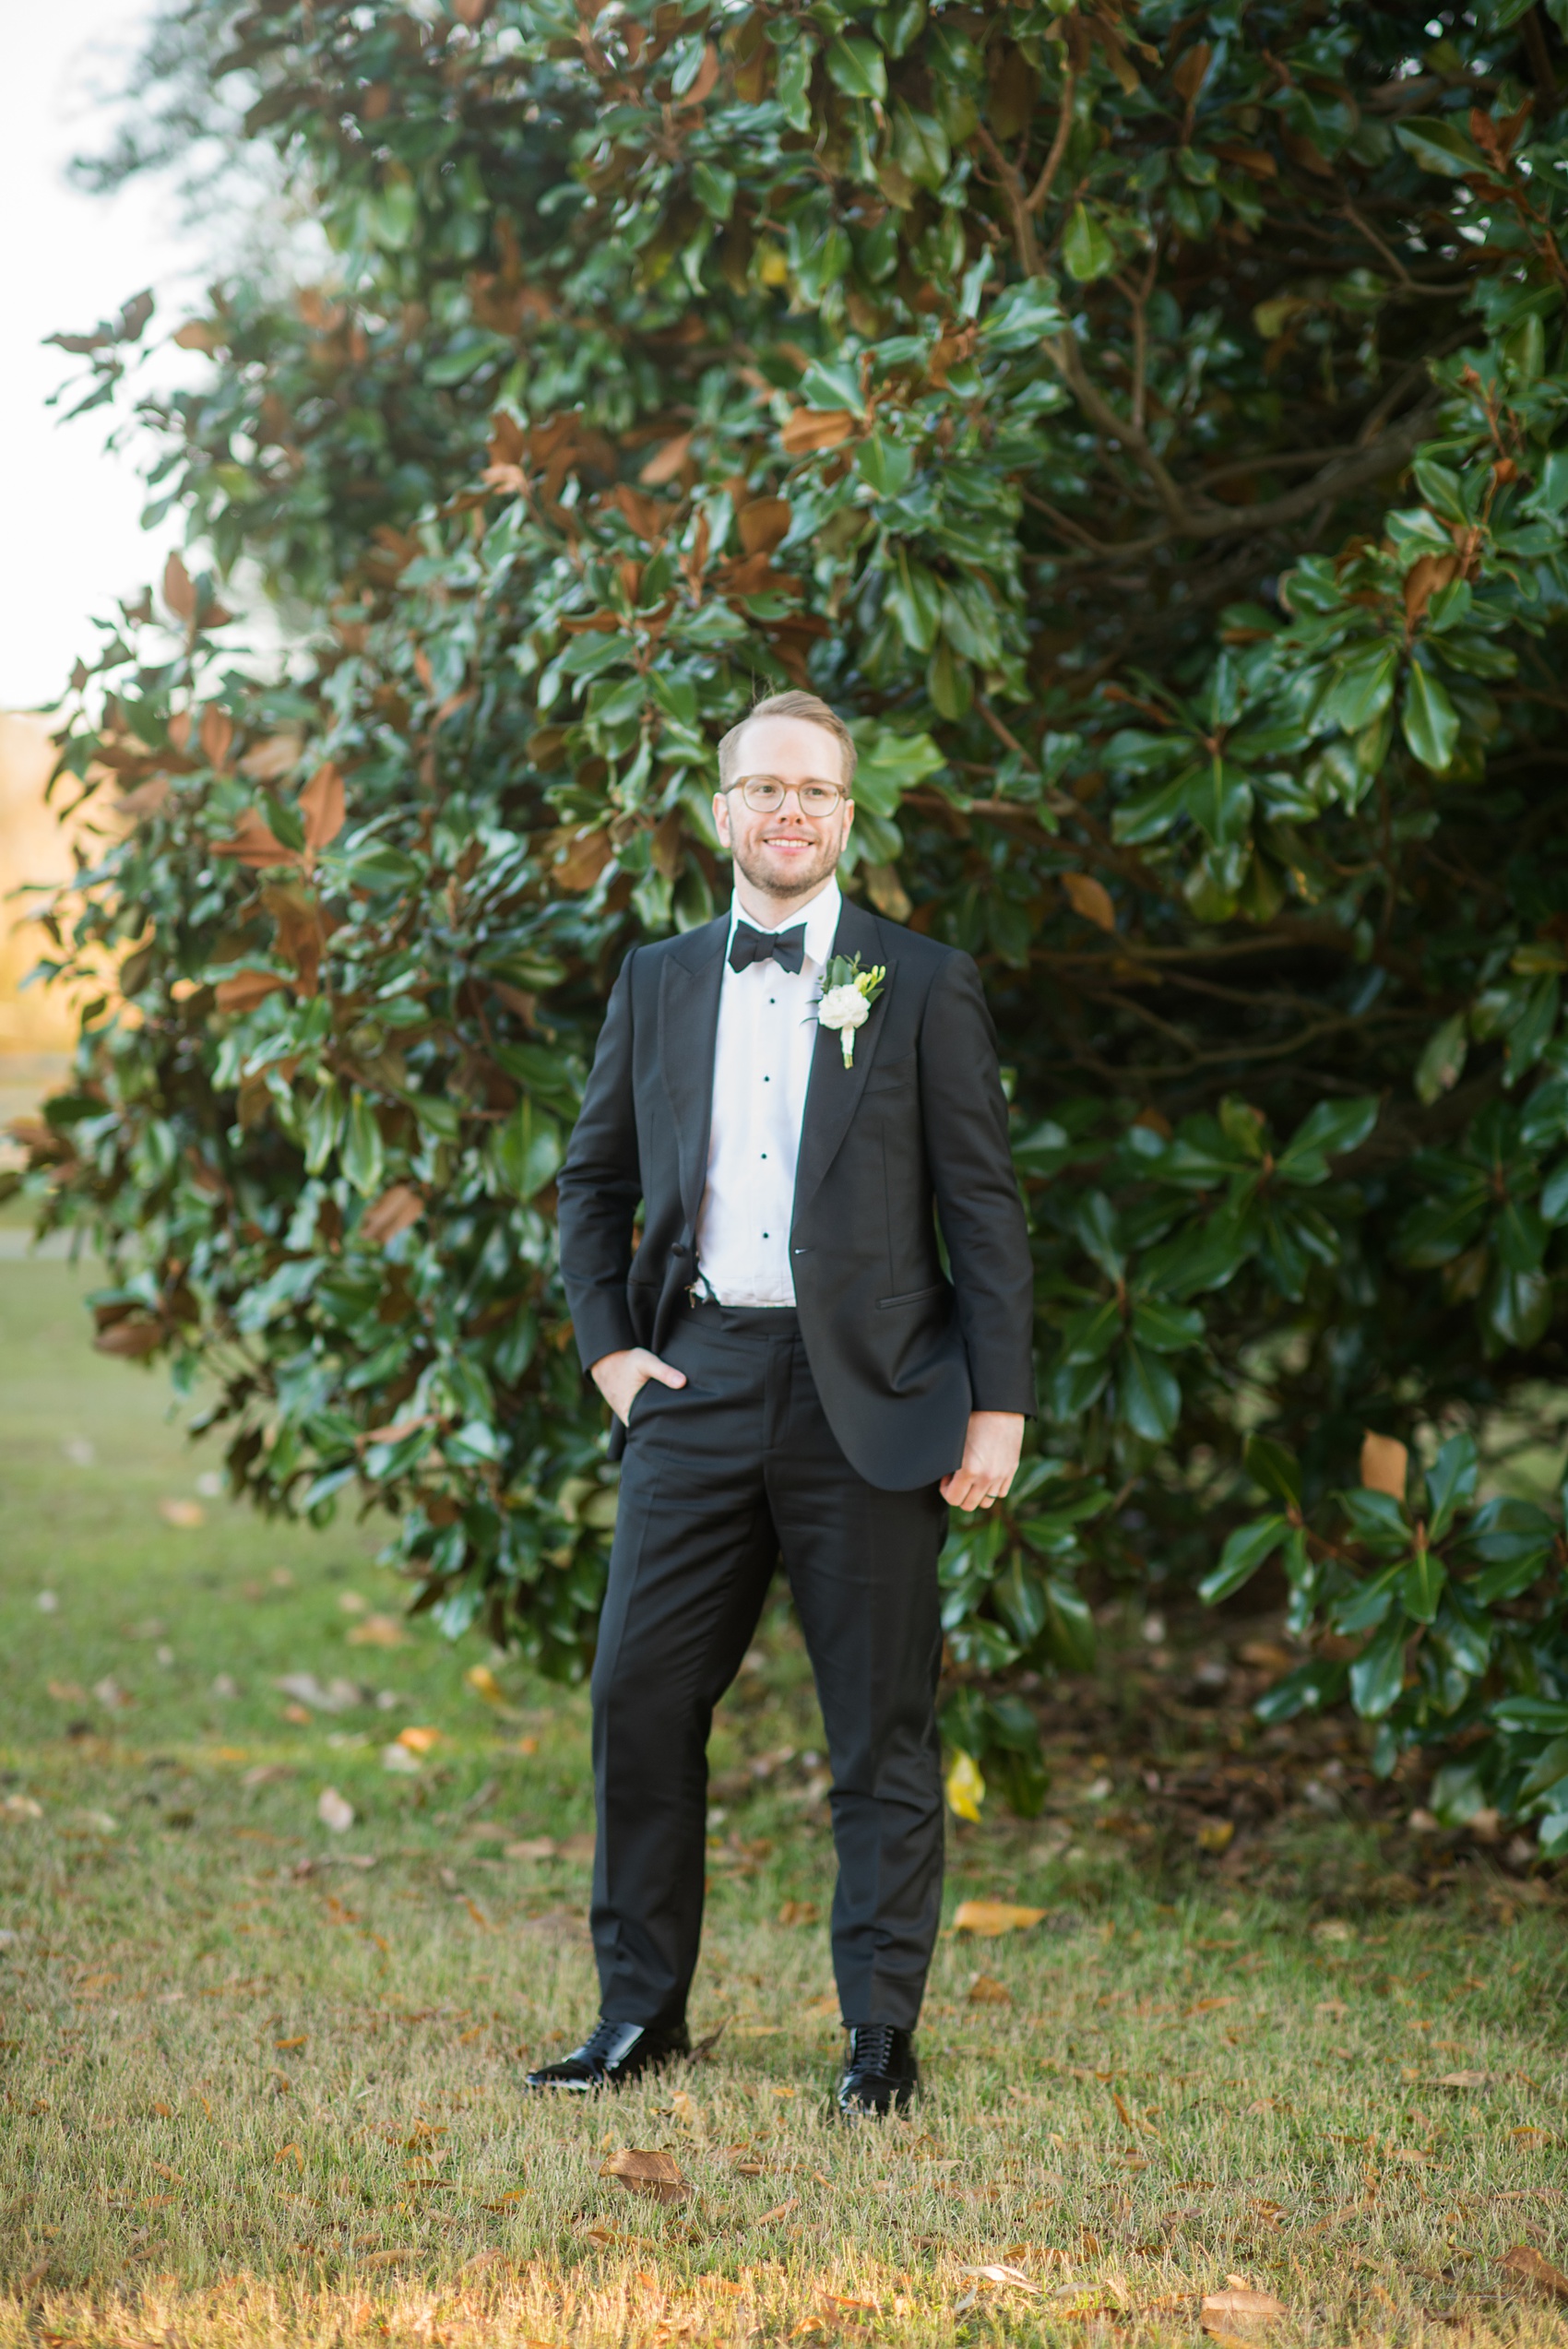 A fall wedding with burgundy, dusty rose and grey details. The groom wore a white ranunculus boutonniere and timeless black tuxedo and bow tie. Mikkel Paige Photography, photographer in Greenville NC and Raleigh captured this wedding at Rock Springs Center, planned by @vivalevent. Click through for more details and pictures from this autumn day! #mikkelpaige #northcarolinawedding #southernwedding #burgundywedding #fallbouquet #groomstyle #tuxedo #ranunculus #boutonniere